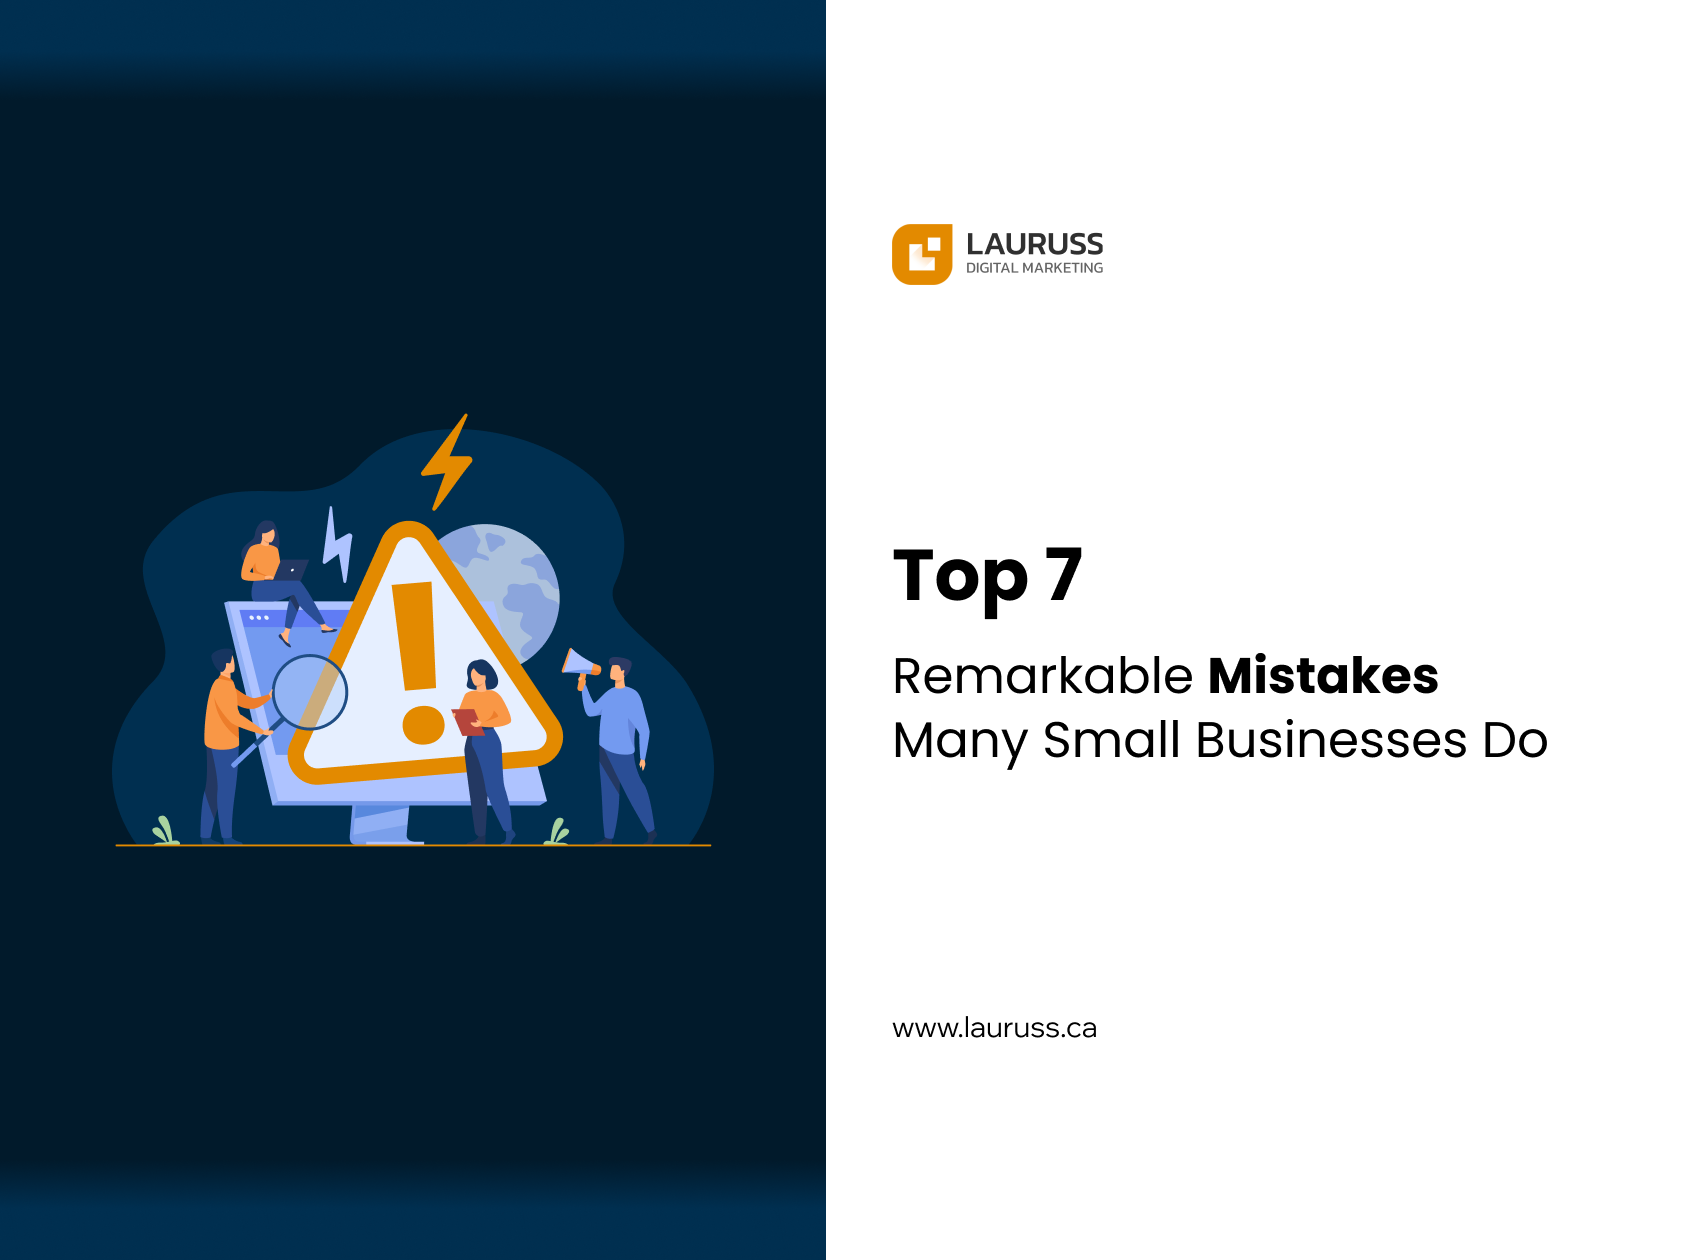 Top 7 Remarkable Mistakes Many Small Businesses Do